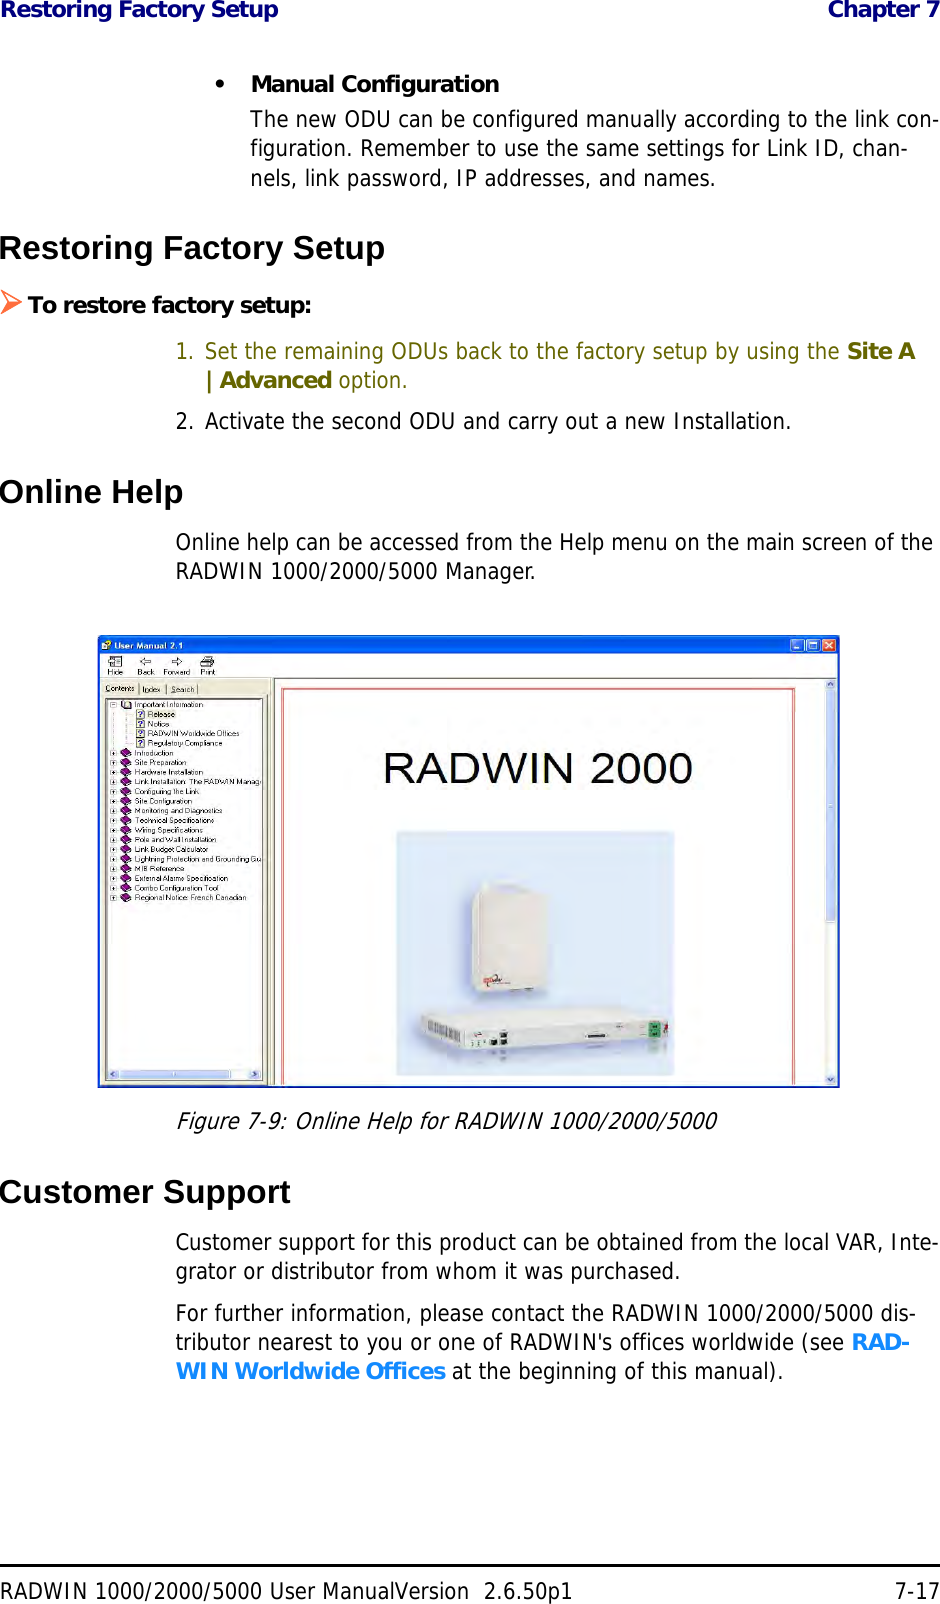 Restoring Factory Setup  Chapter 7RADWIN 1000/2000/5000 User ManualVersion  2.6.50p1 7-17• Manual ConfigurationThe new ODU can be configured manually according to the link con-figuration. Remember to use the same settings for Link ID, chan-nels, link password, IP addresses, and names. Restoring Factory SetupTo restore factory setup:1. Set the remaining ODUs back to the factory setup by using the Site A |Advanced option.2. Activate the second ODU and carry out a new Installation.Online HelpOnline help can be accessed from the Help menu on the main screen of the RADWIN 1000/2000/5000 Manager.Figure 7-9: Online Help for RADWIN 1000/2000/5000Customer SupportCustomer support for this product can be obtained from the local VAR, Inte-grator or distributor from whom it was purchased.For further information, please contact the RADWIN 1000/2000/5000 dis-tributor nearest to you or one of RADWIN&apos;s offices worldwide (see RAD-WIN Worldwide Offices at the beginning of this manual).